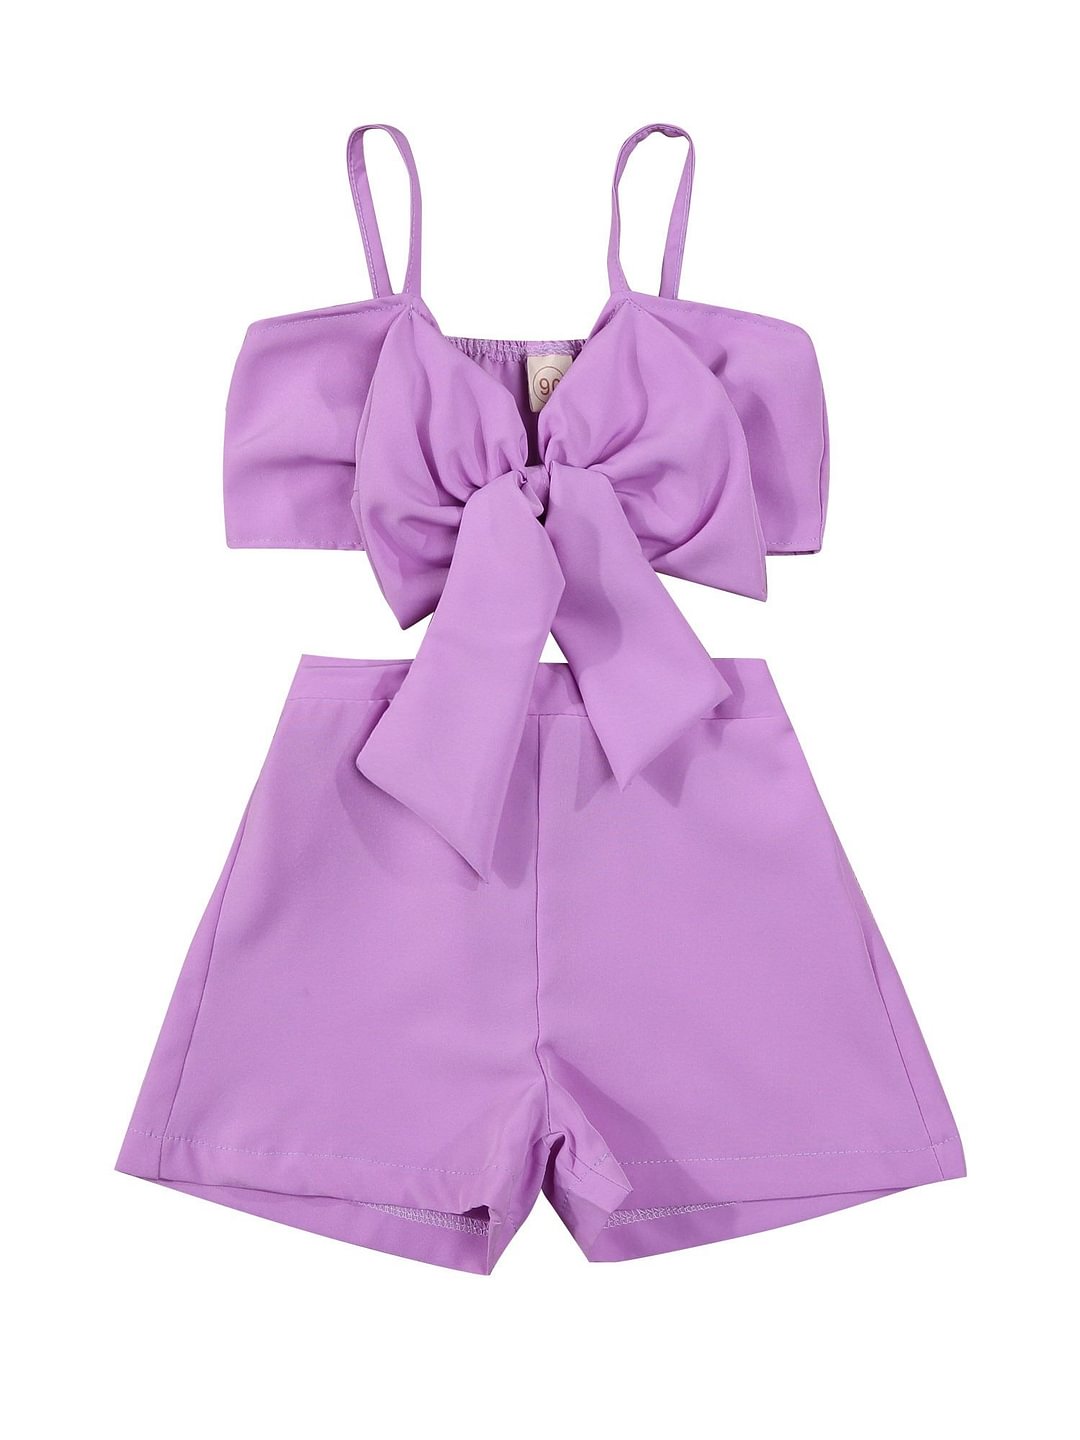 Toddler Girls 2PCS Summer Outfits, Sleeveless Bow Front Tank Tops + Elastic Waist Shorts Set 2-7Y